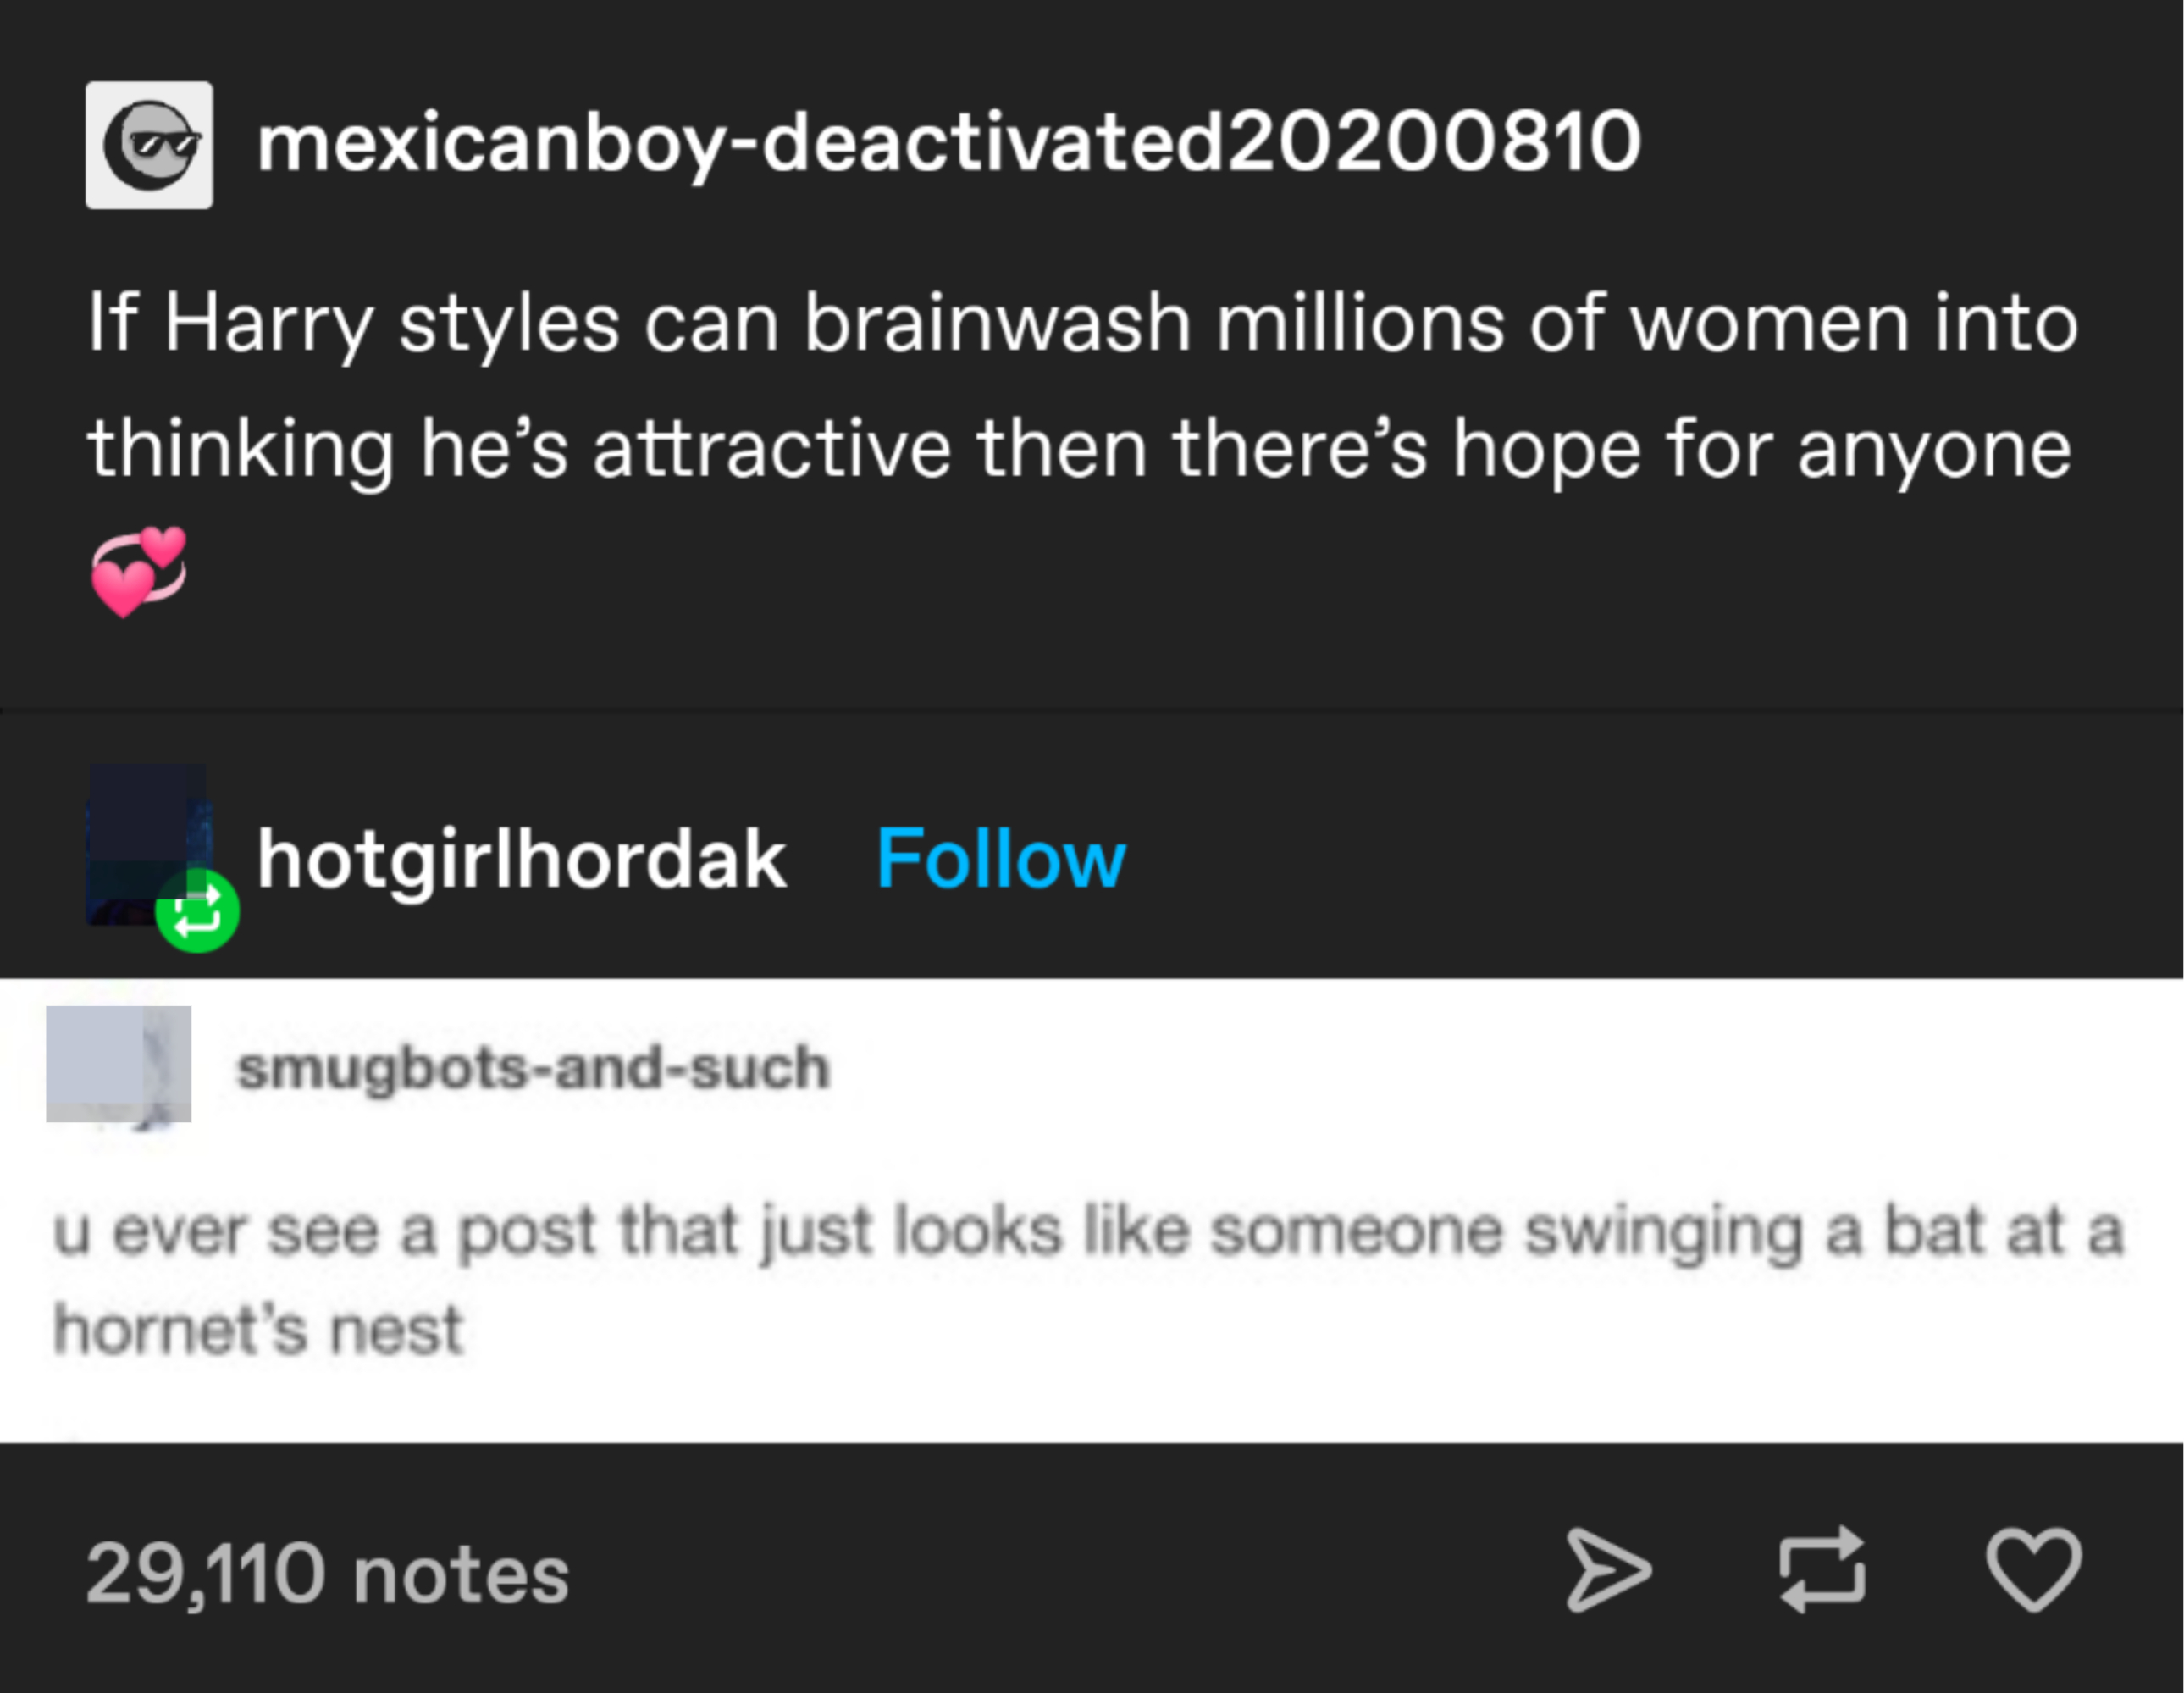 u ever see a post that just looks like someone swinging a bat at a hornet&#x27;s nest